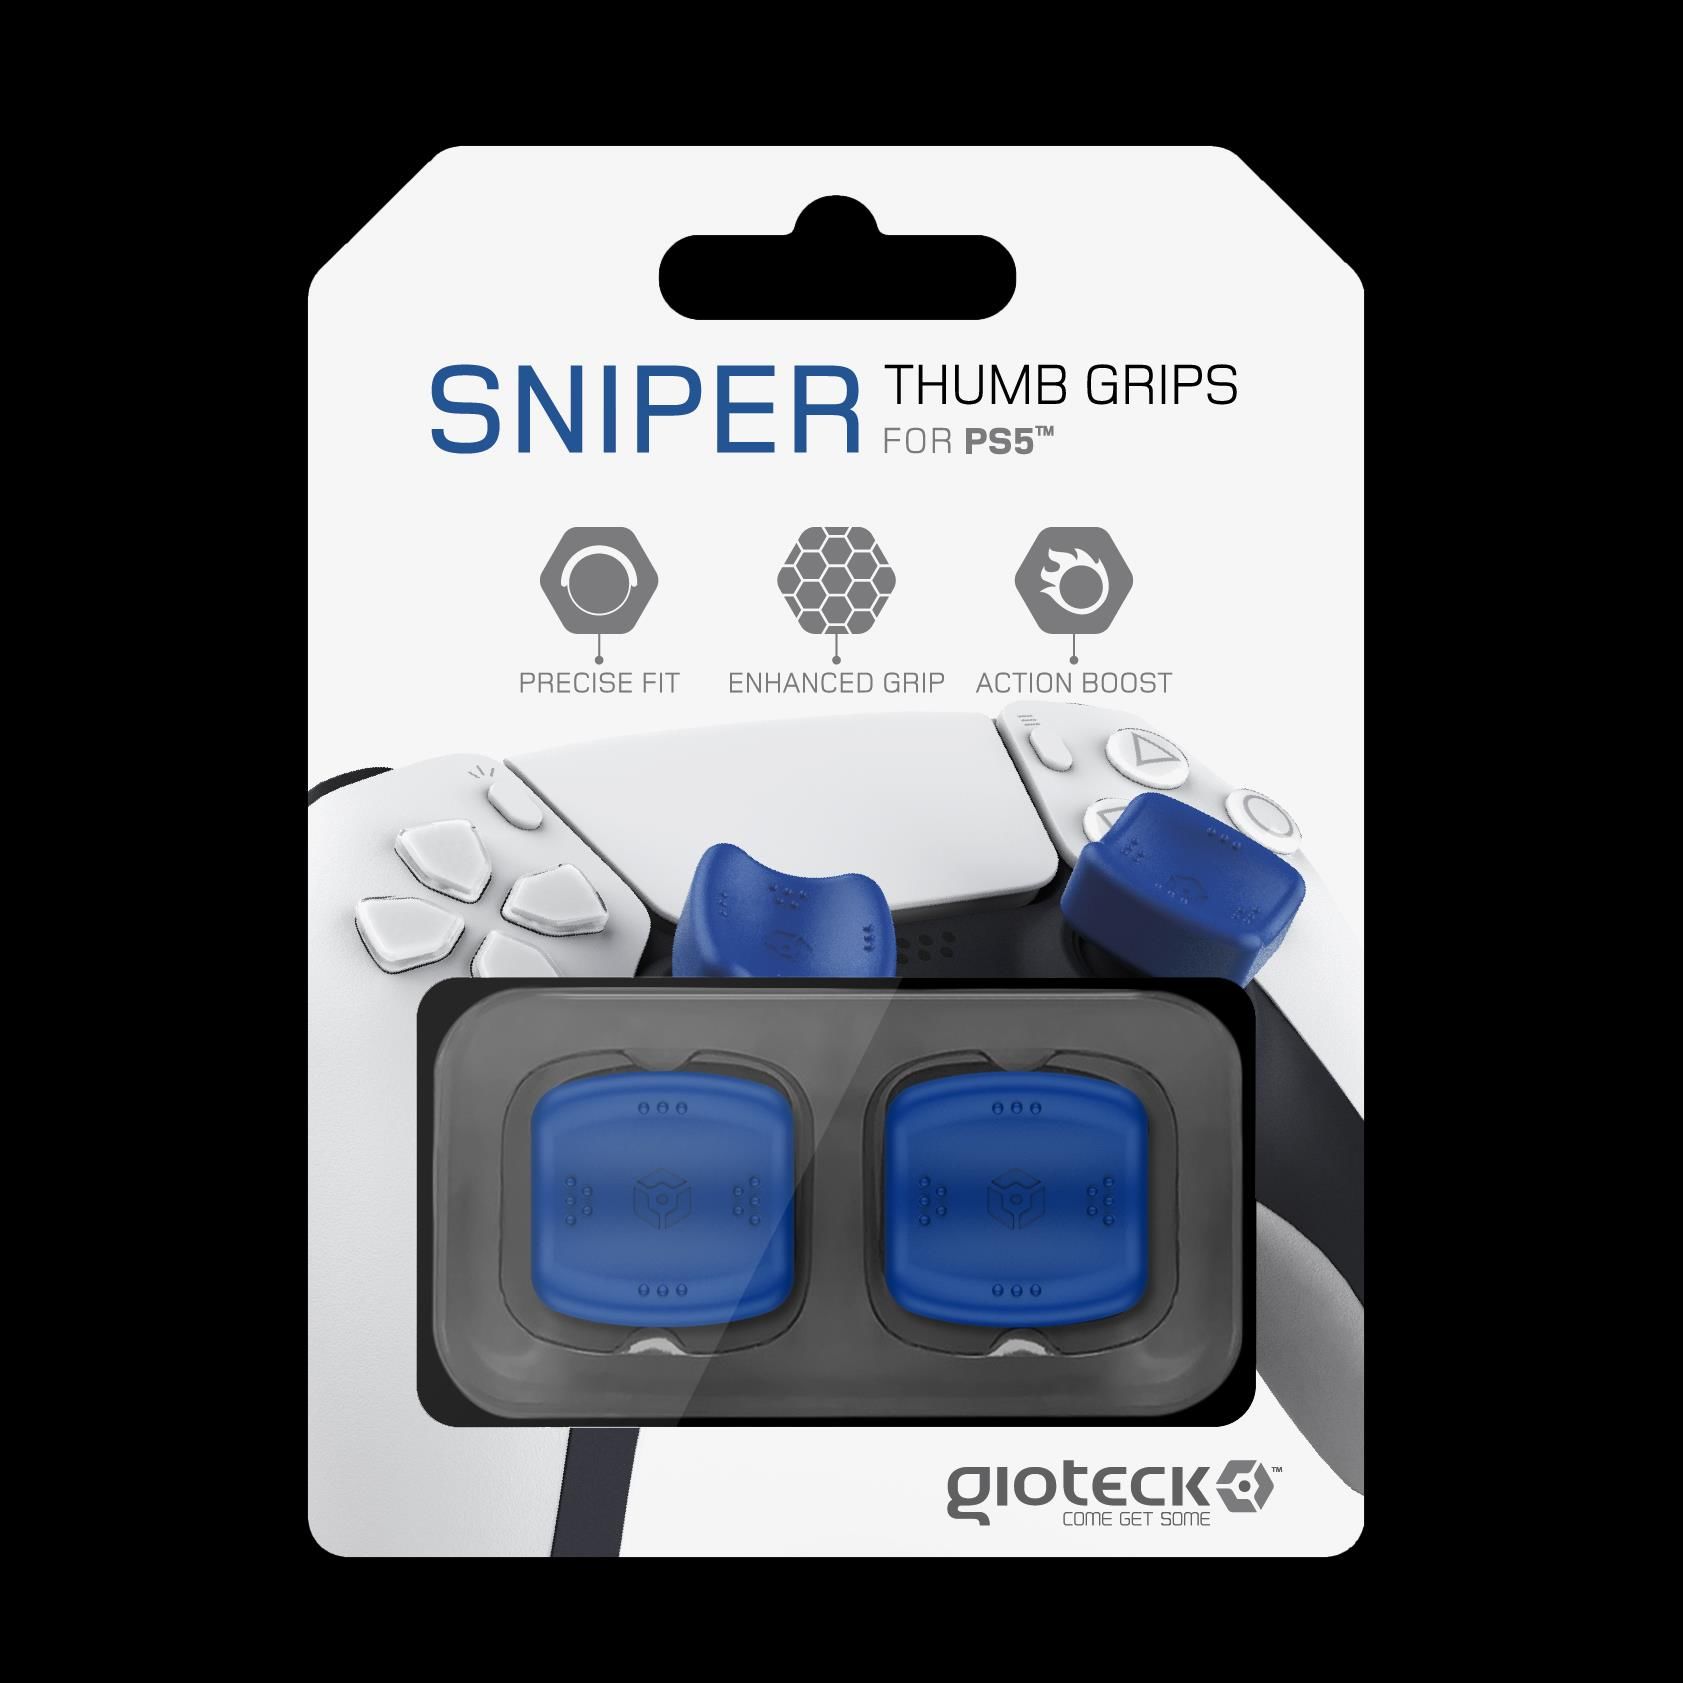 Gioteck - Reposes Pouce (Thumb Grips) Sniper Bleu pour PS5